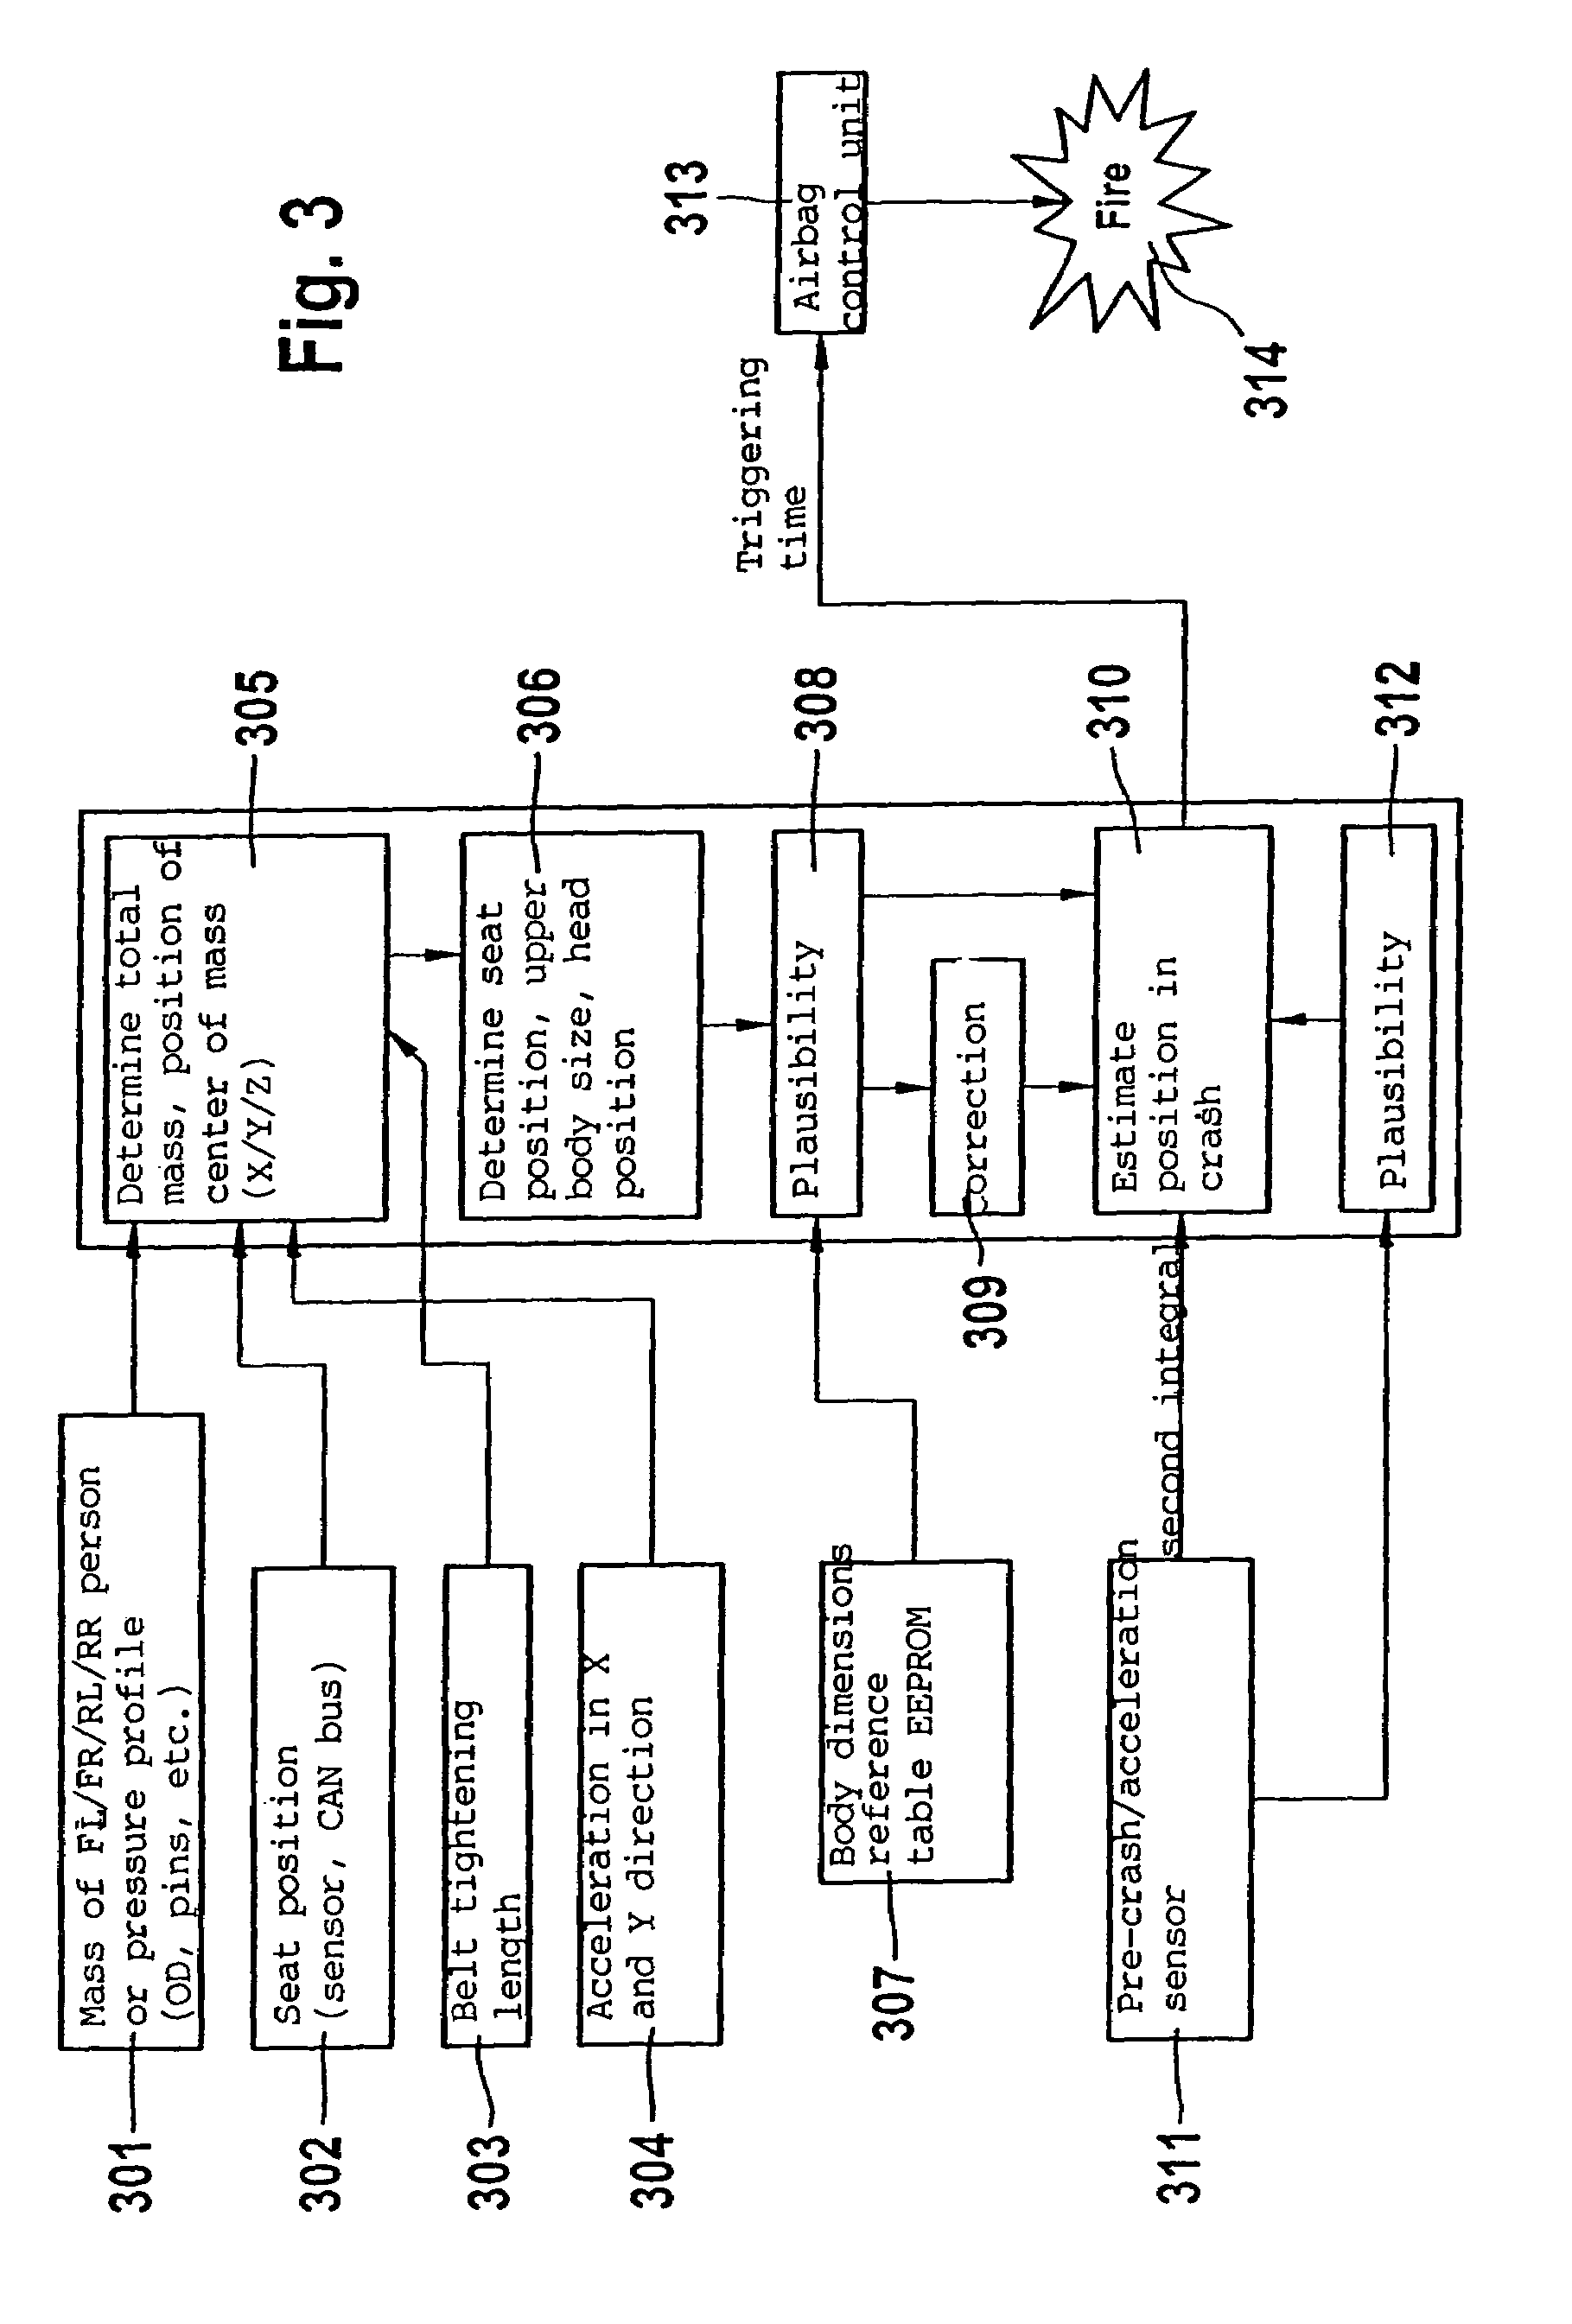 Apparatus for protecting a vehicle occupant